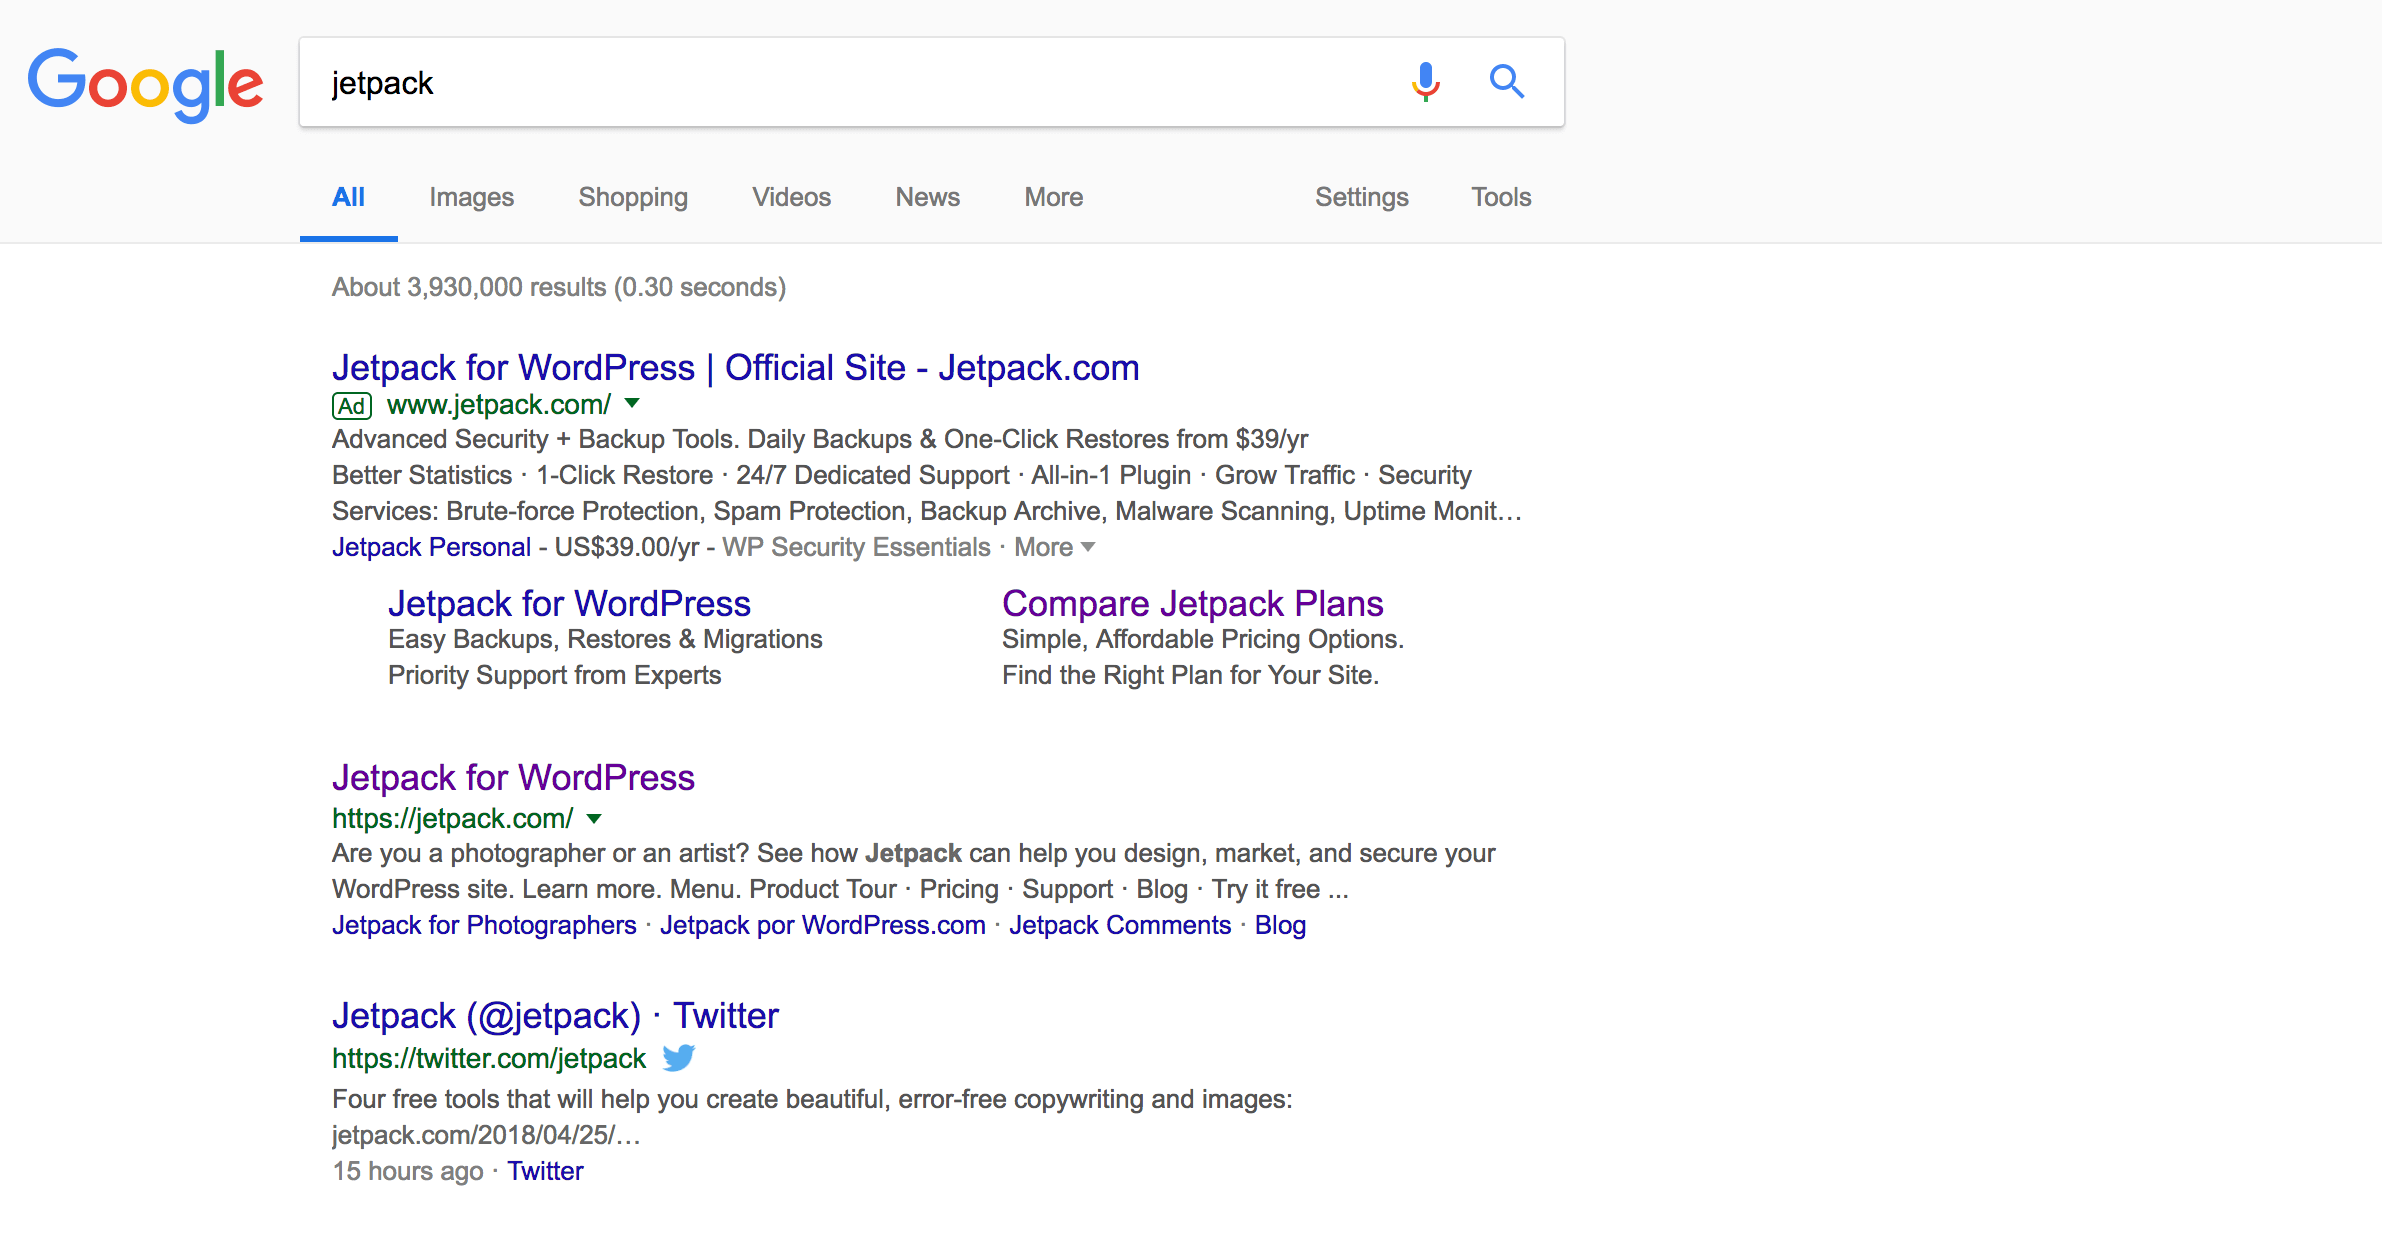 An example of search results in Google.